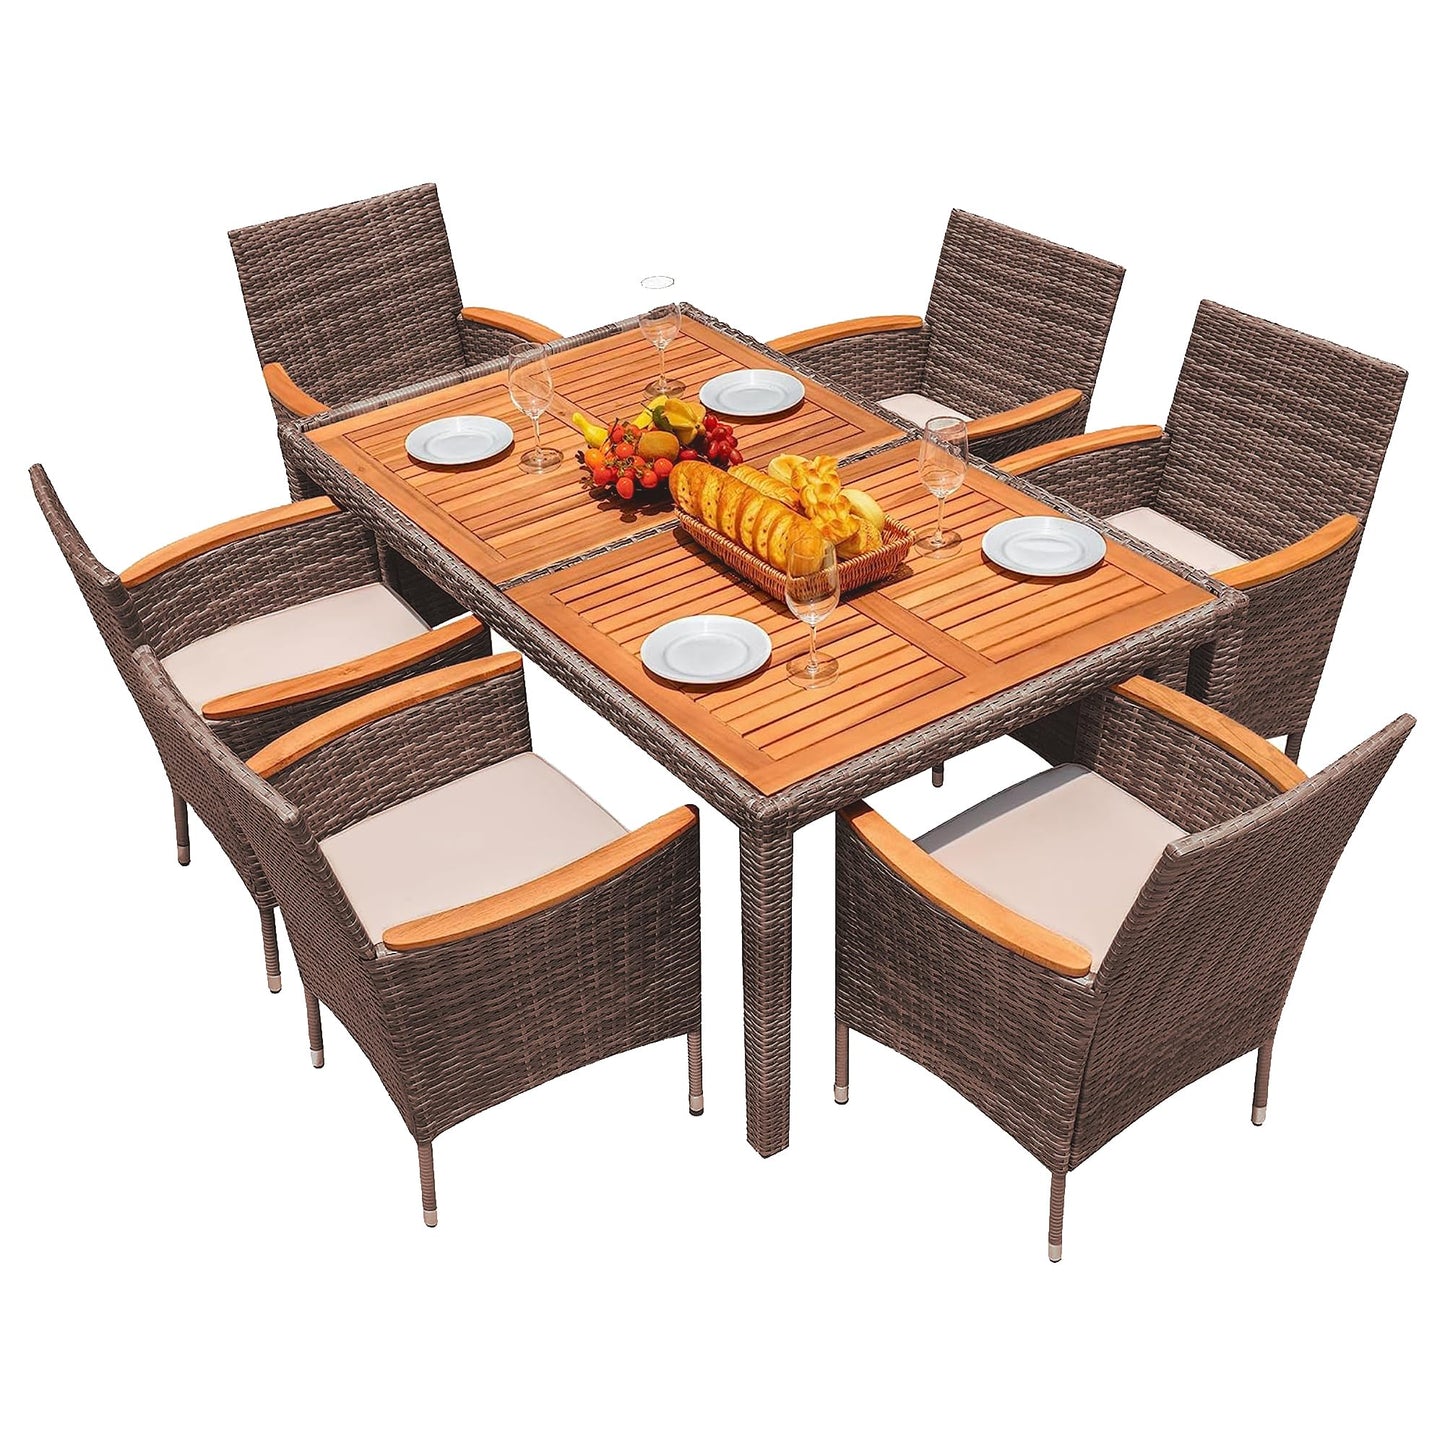 Flamaker 7 Piece Patio Dining Set Outdoor Acacia Wood Table and Chairs with Soft Cushions Wicker Patio Furniture for Deck, Backyard, Garden (Brown)